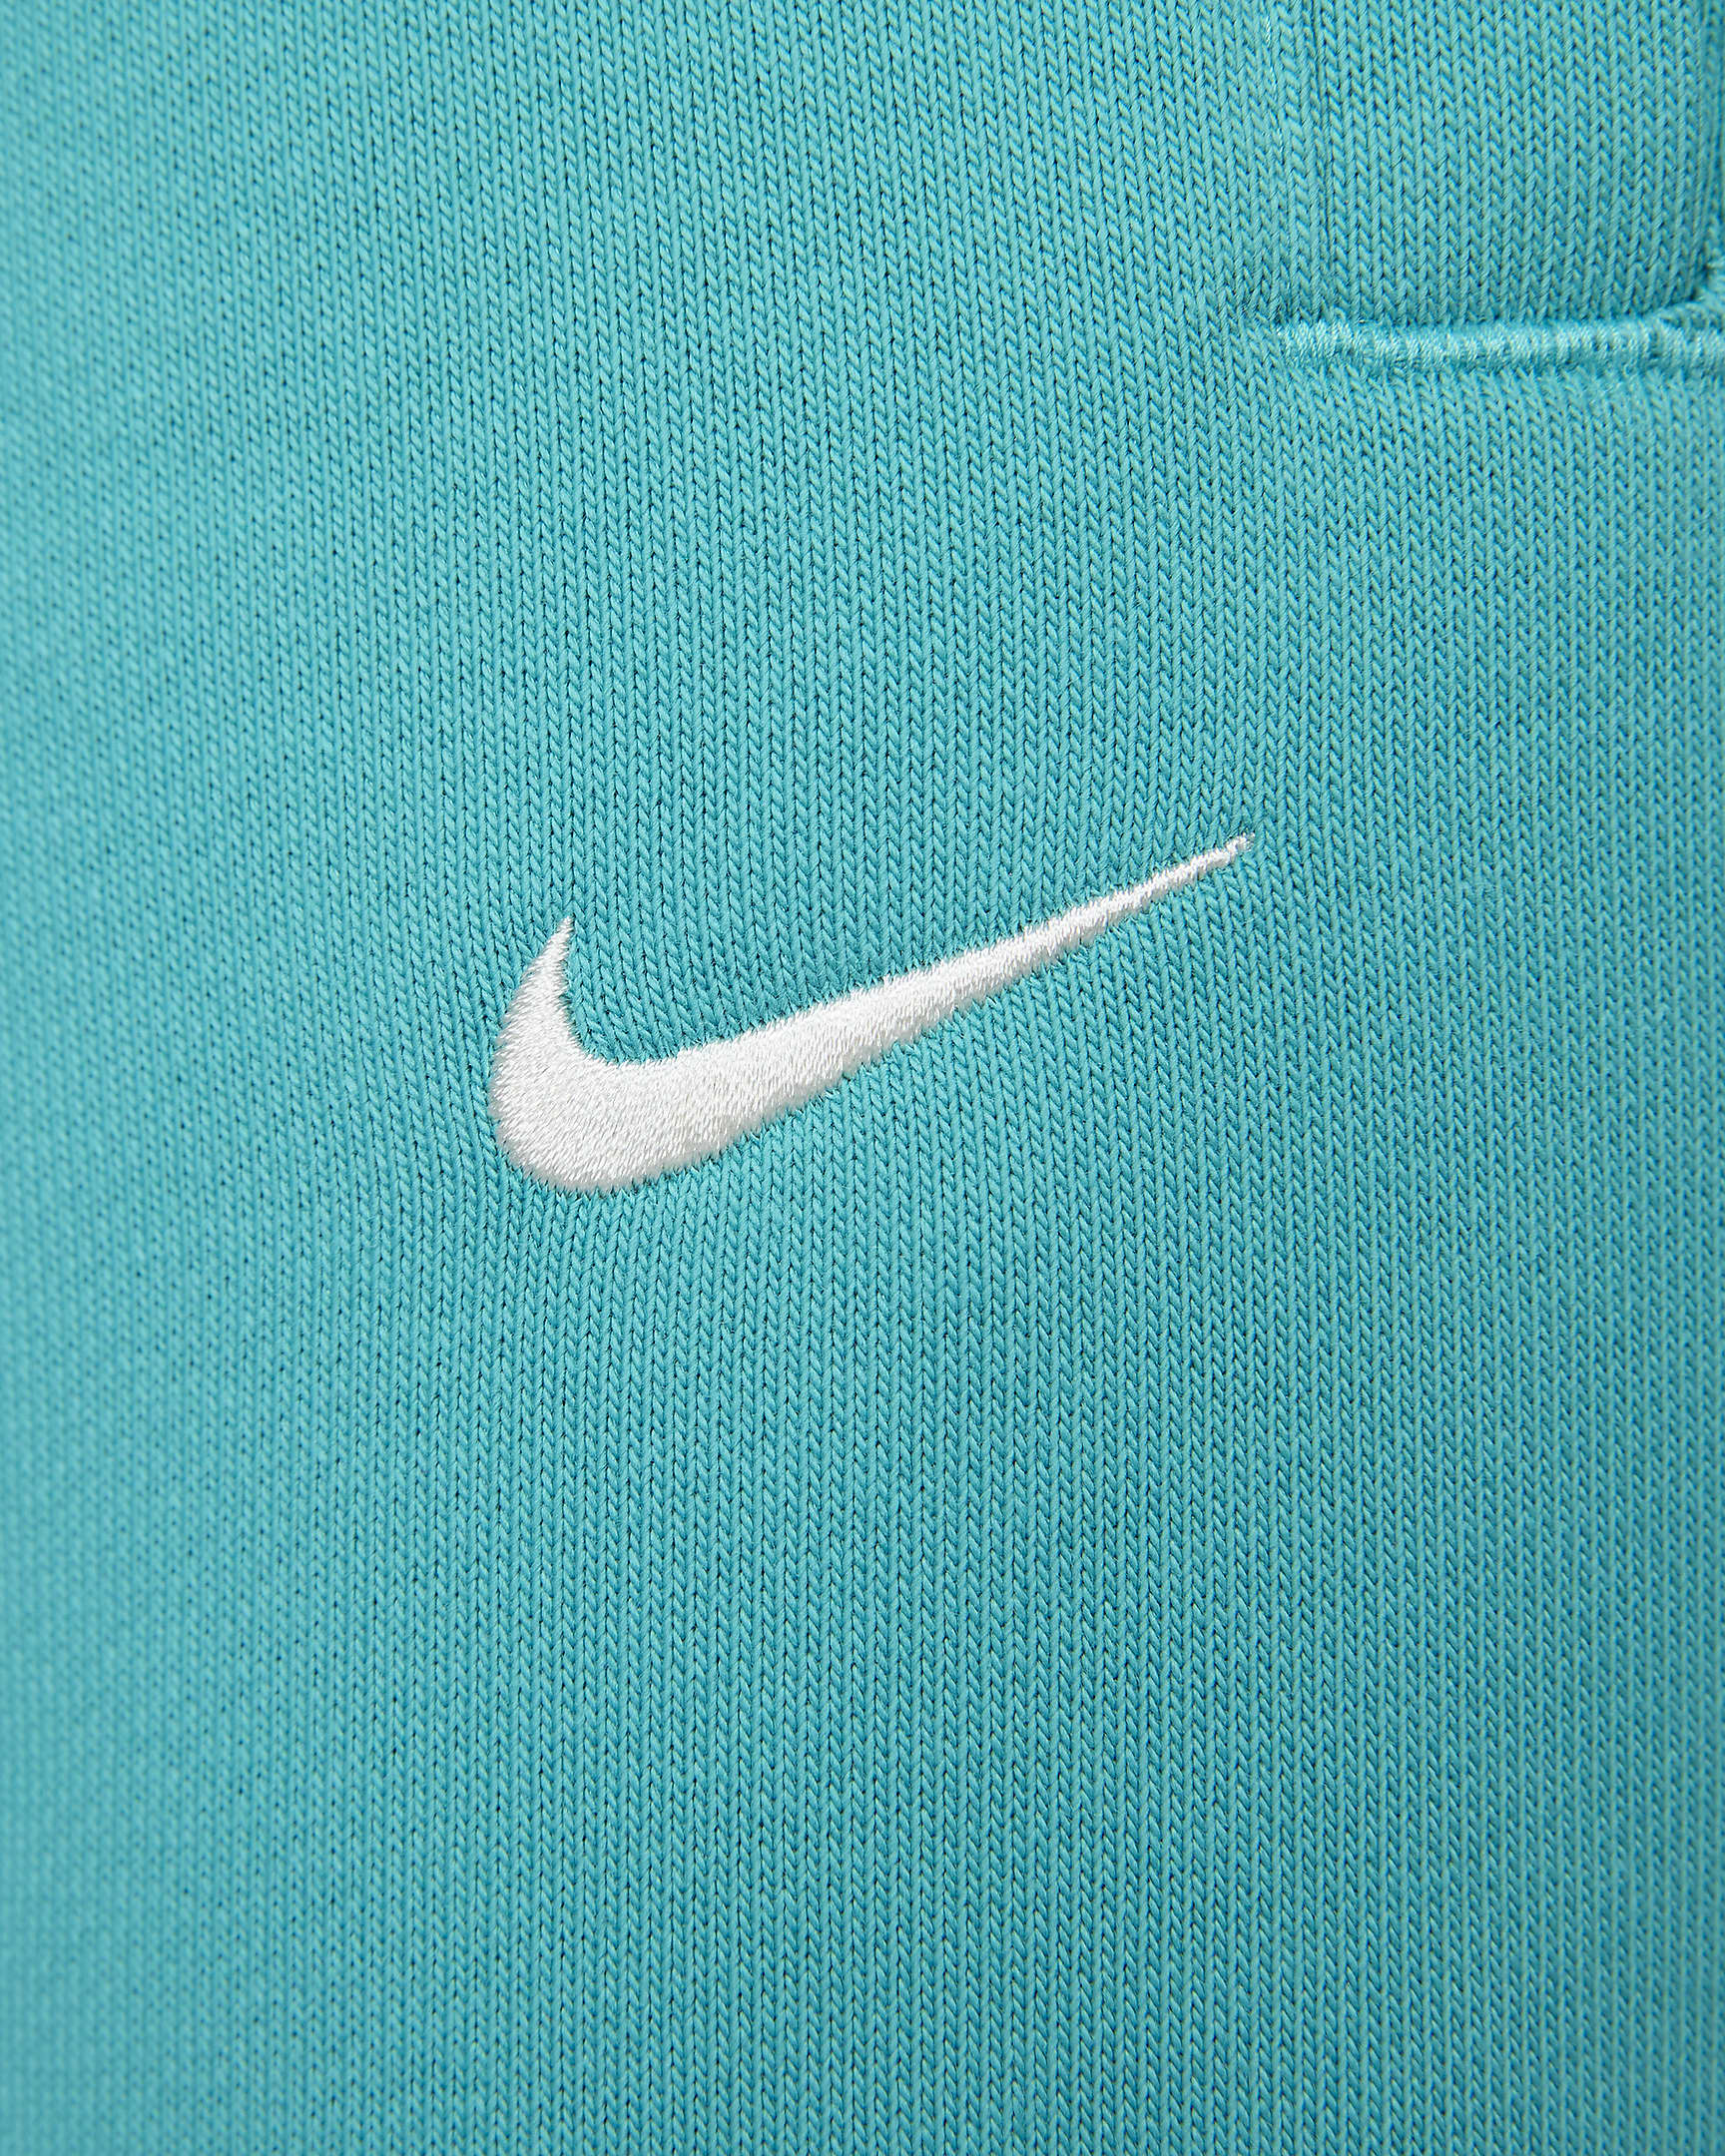 Nike Standard Issue Men's Dri-FIT Basketball Trousers. Nike AT